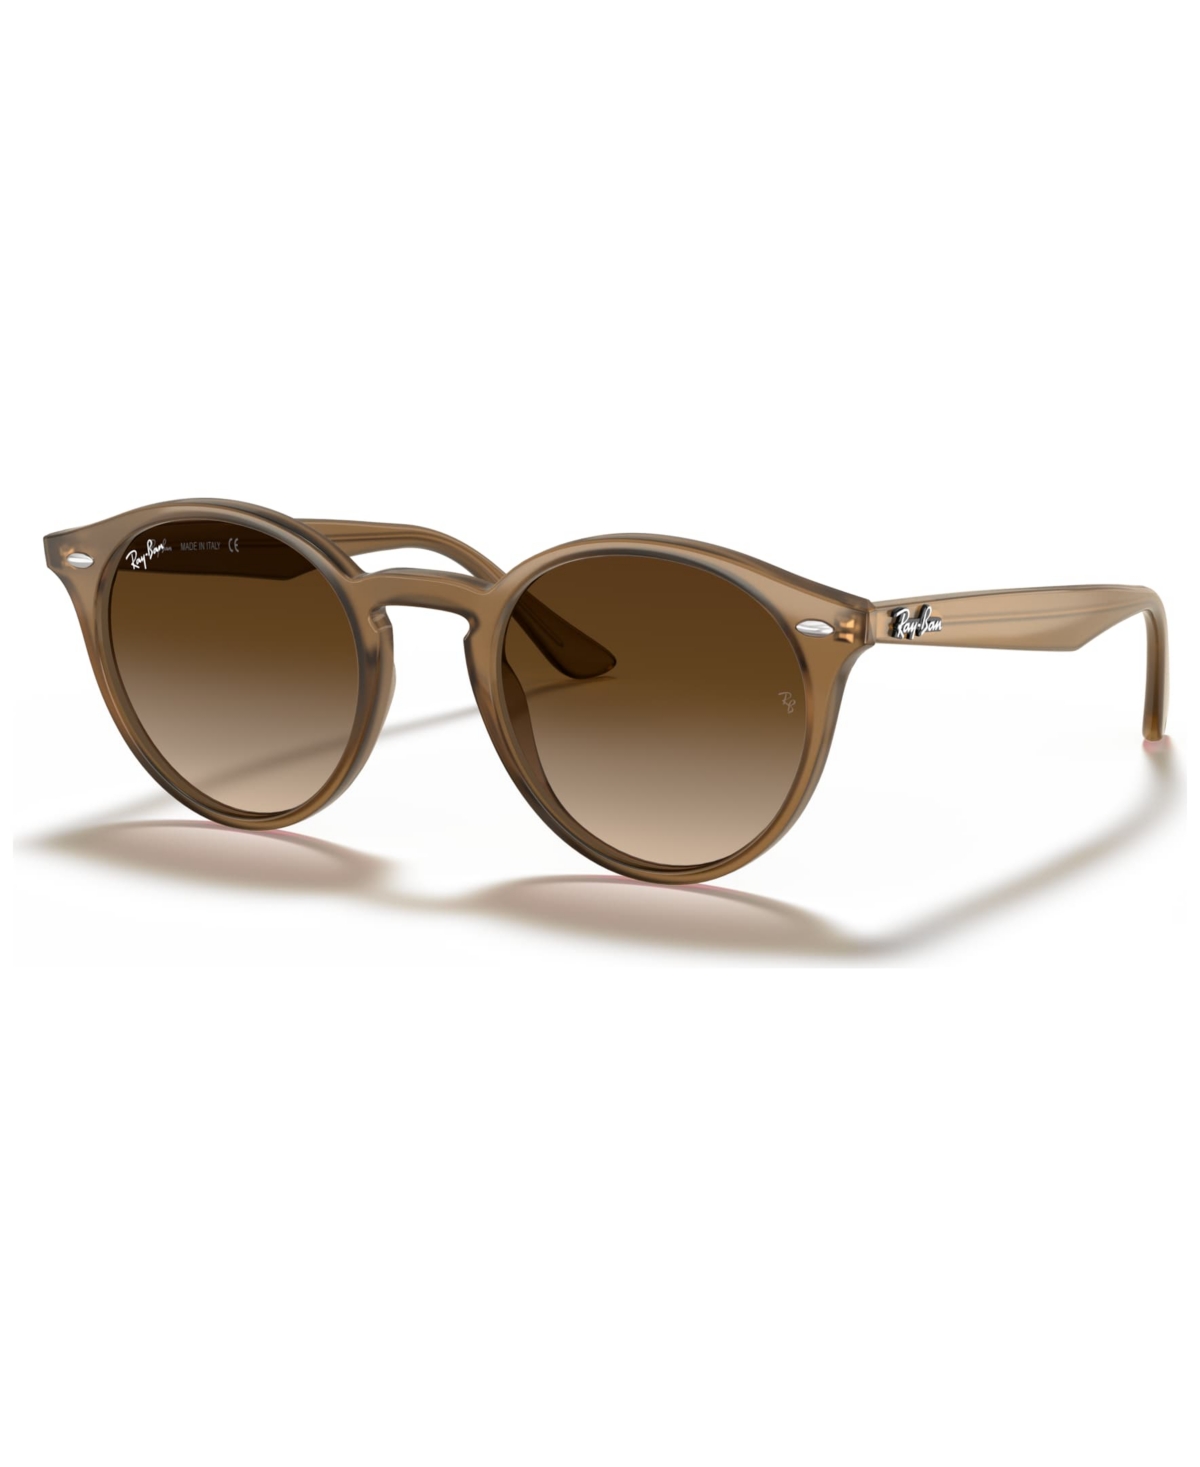 Ray Ban Unisex Low Bridge Fit Sunglasses, Rb2180 49 In Brown